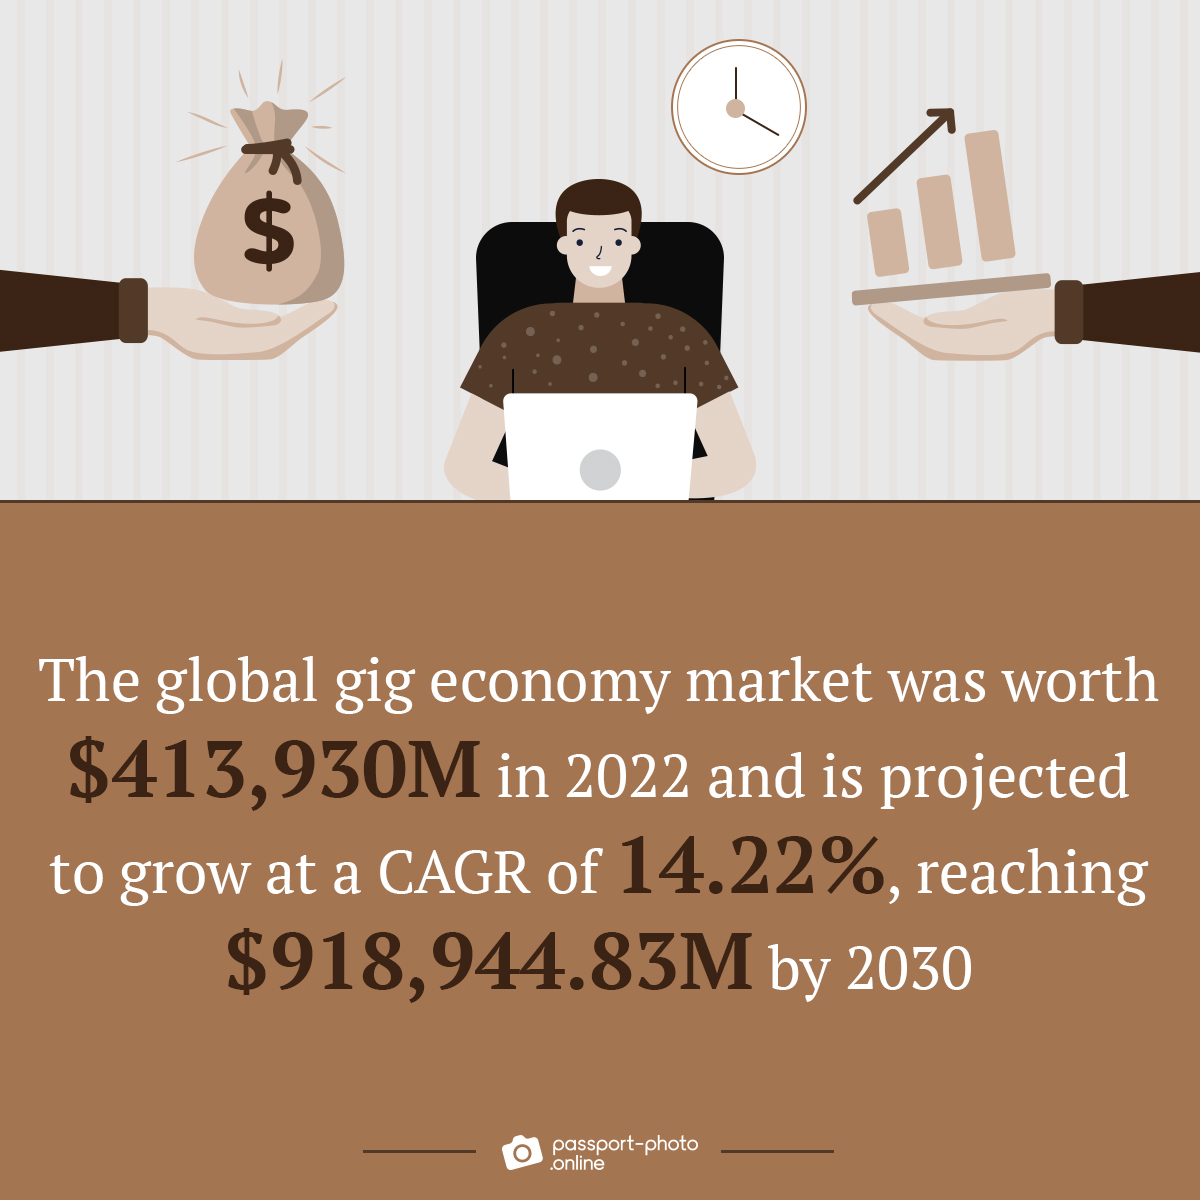 the global gig economy market is projected to grow at a CAGR of 14.22%, reaching $918,944.83M by 2030